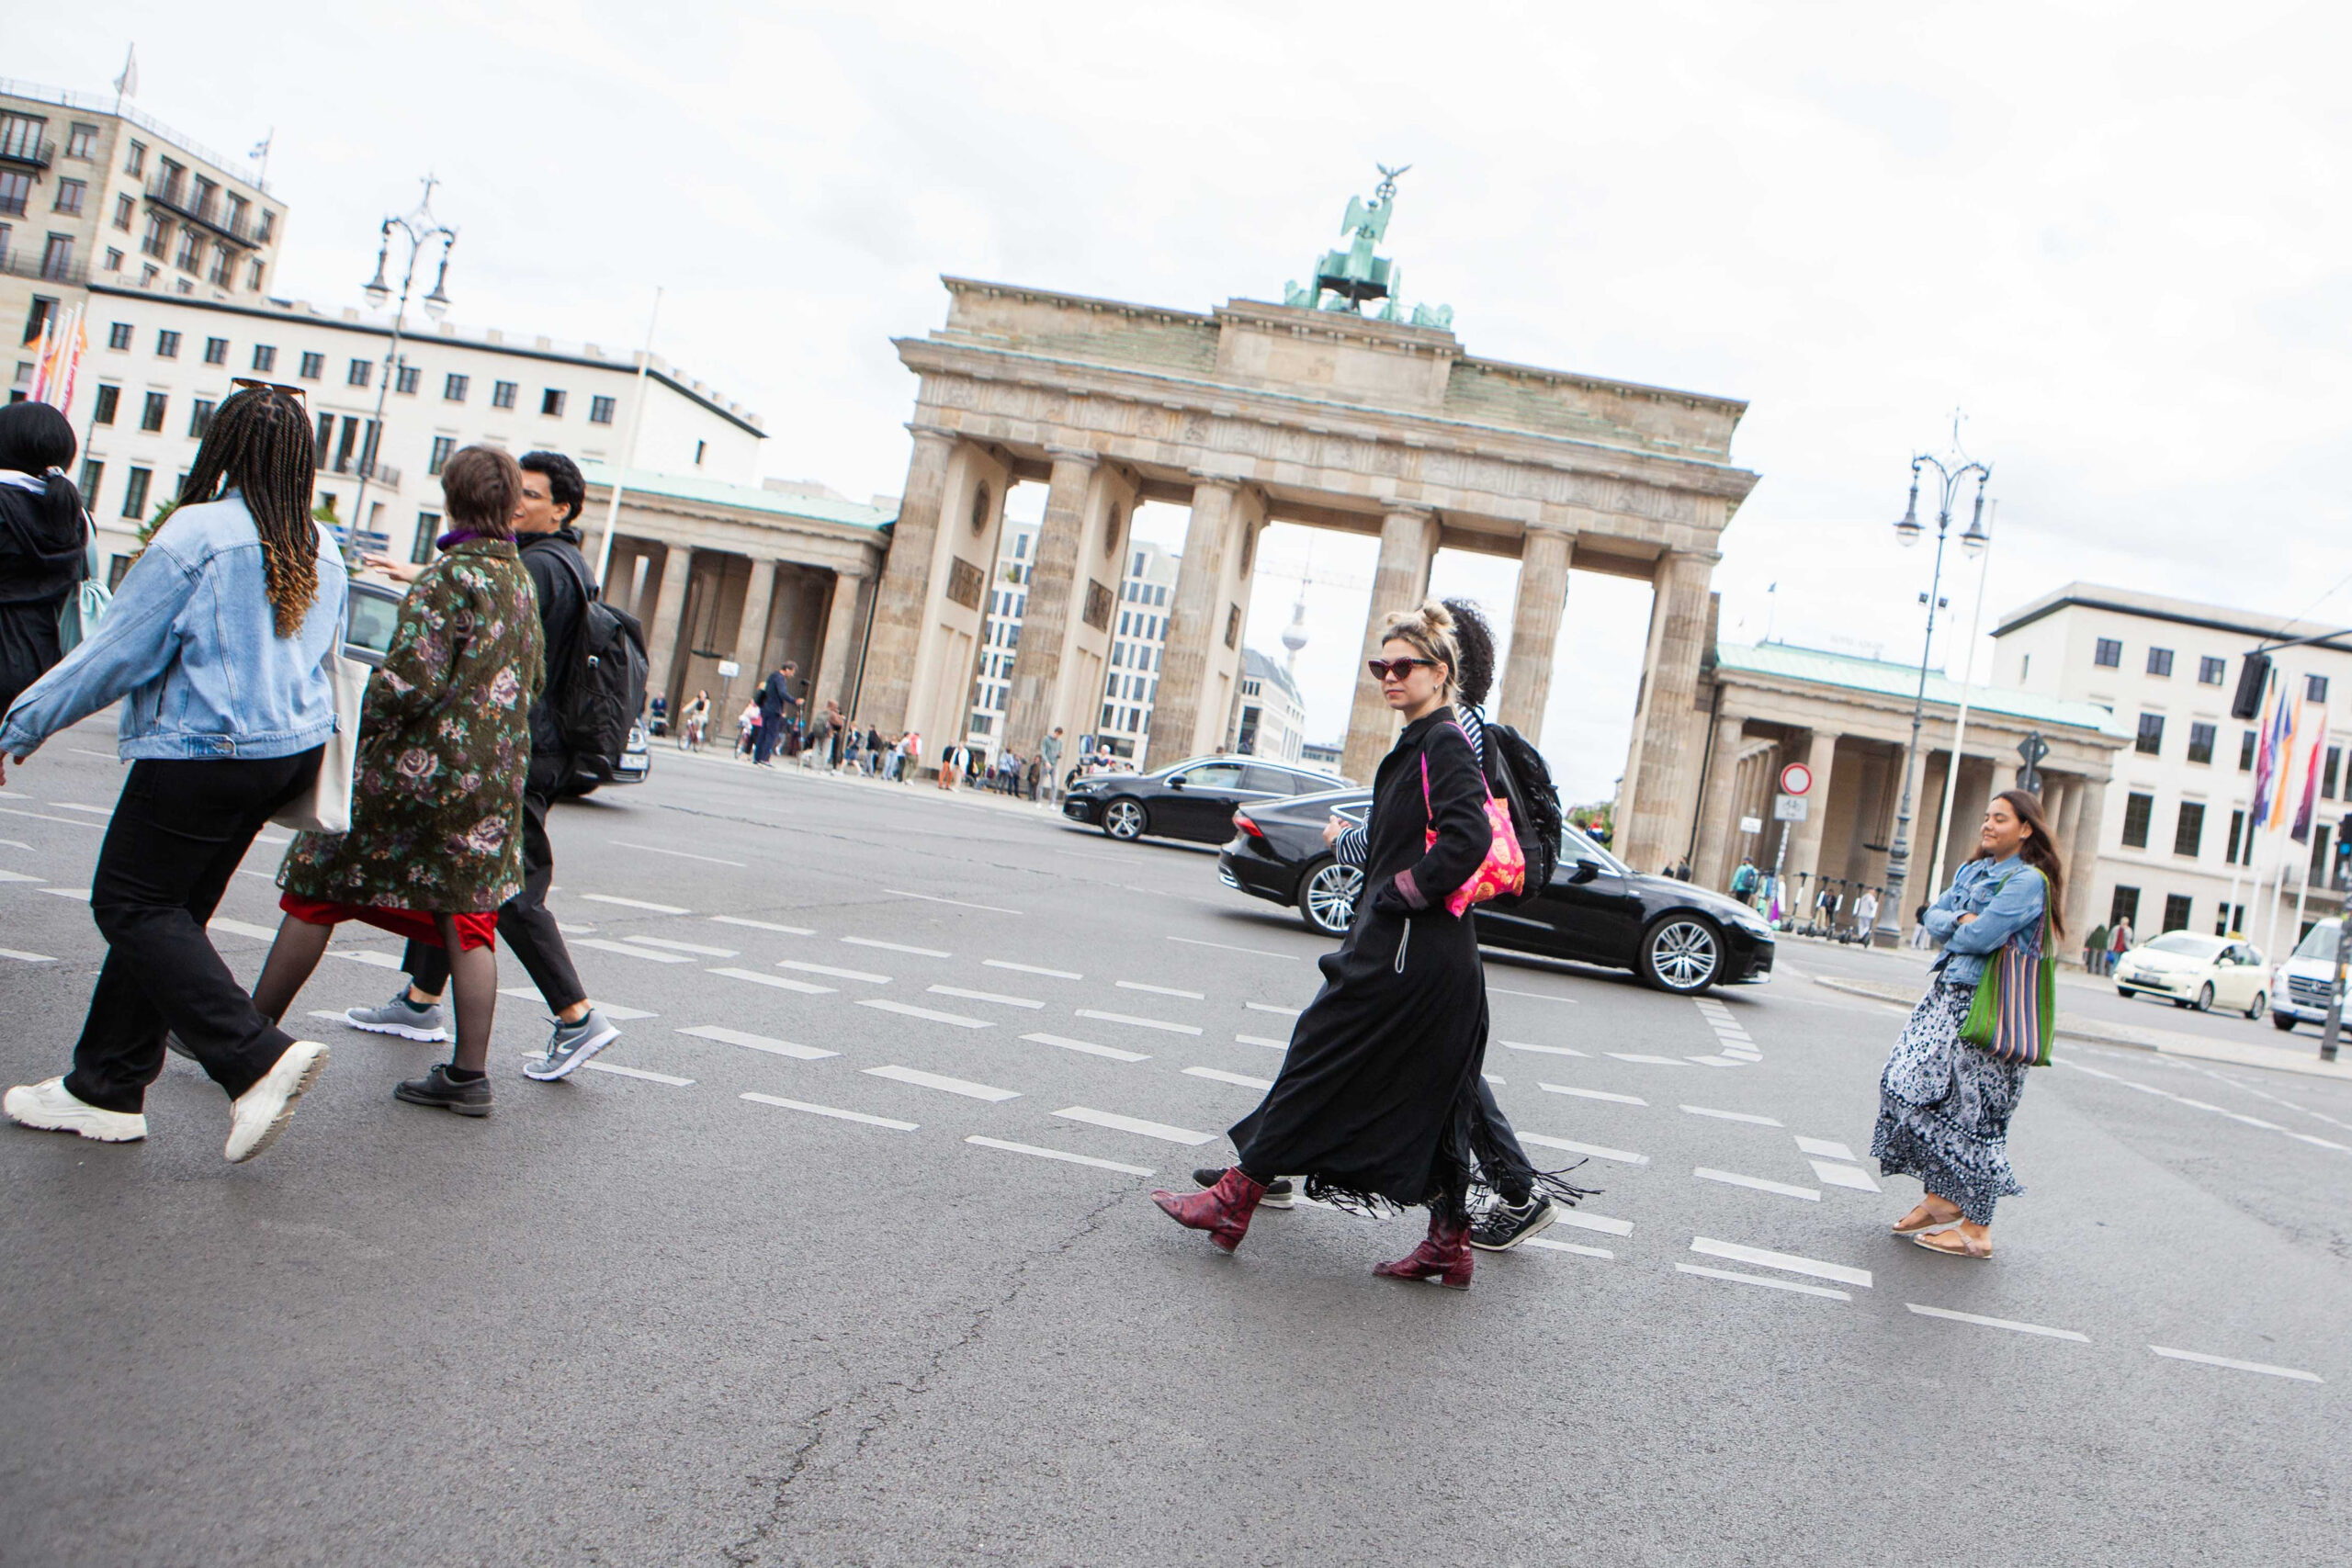 A captured moment on the way to the Memorial to the Sinti and Roma of Europe Murdered Under National Socialism in front of the Brandenburger Tor in Berlin 2022. (Photography by Sharon Nathan)